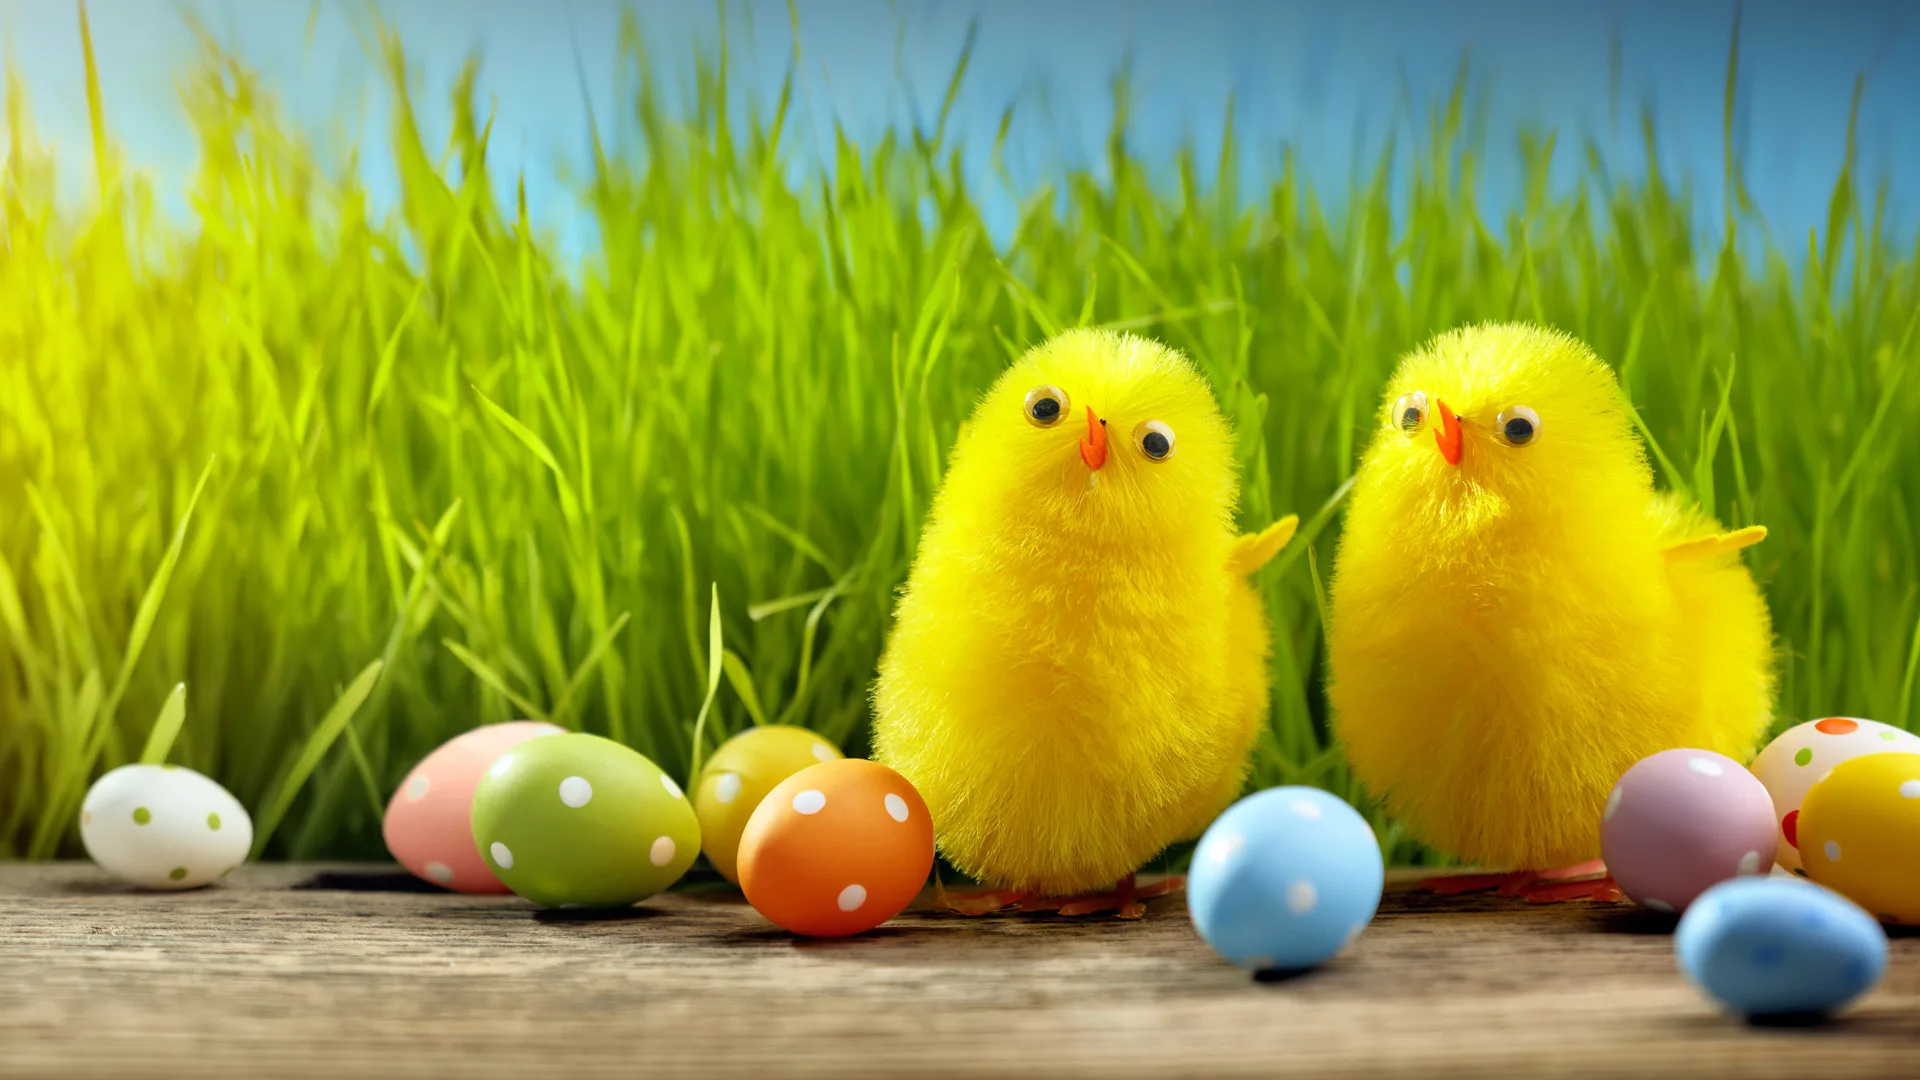 Two yellow toy fluffy chicks surrounded by colourful eggs against a background of green grass and blue sky